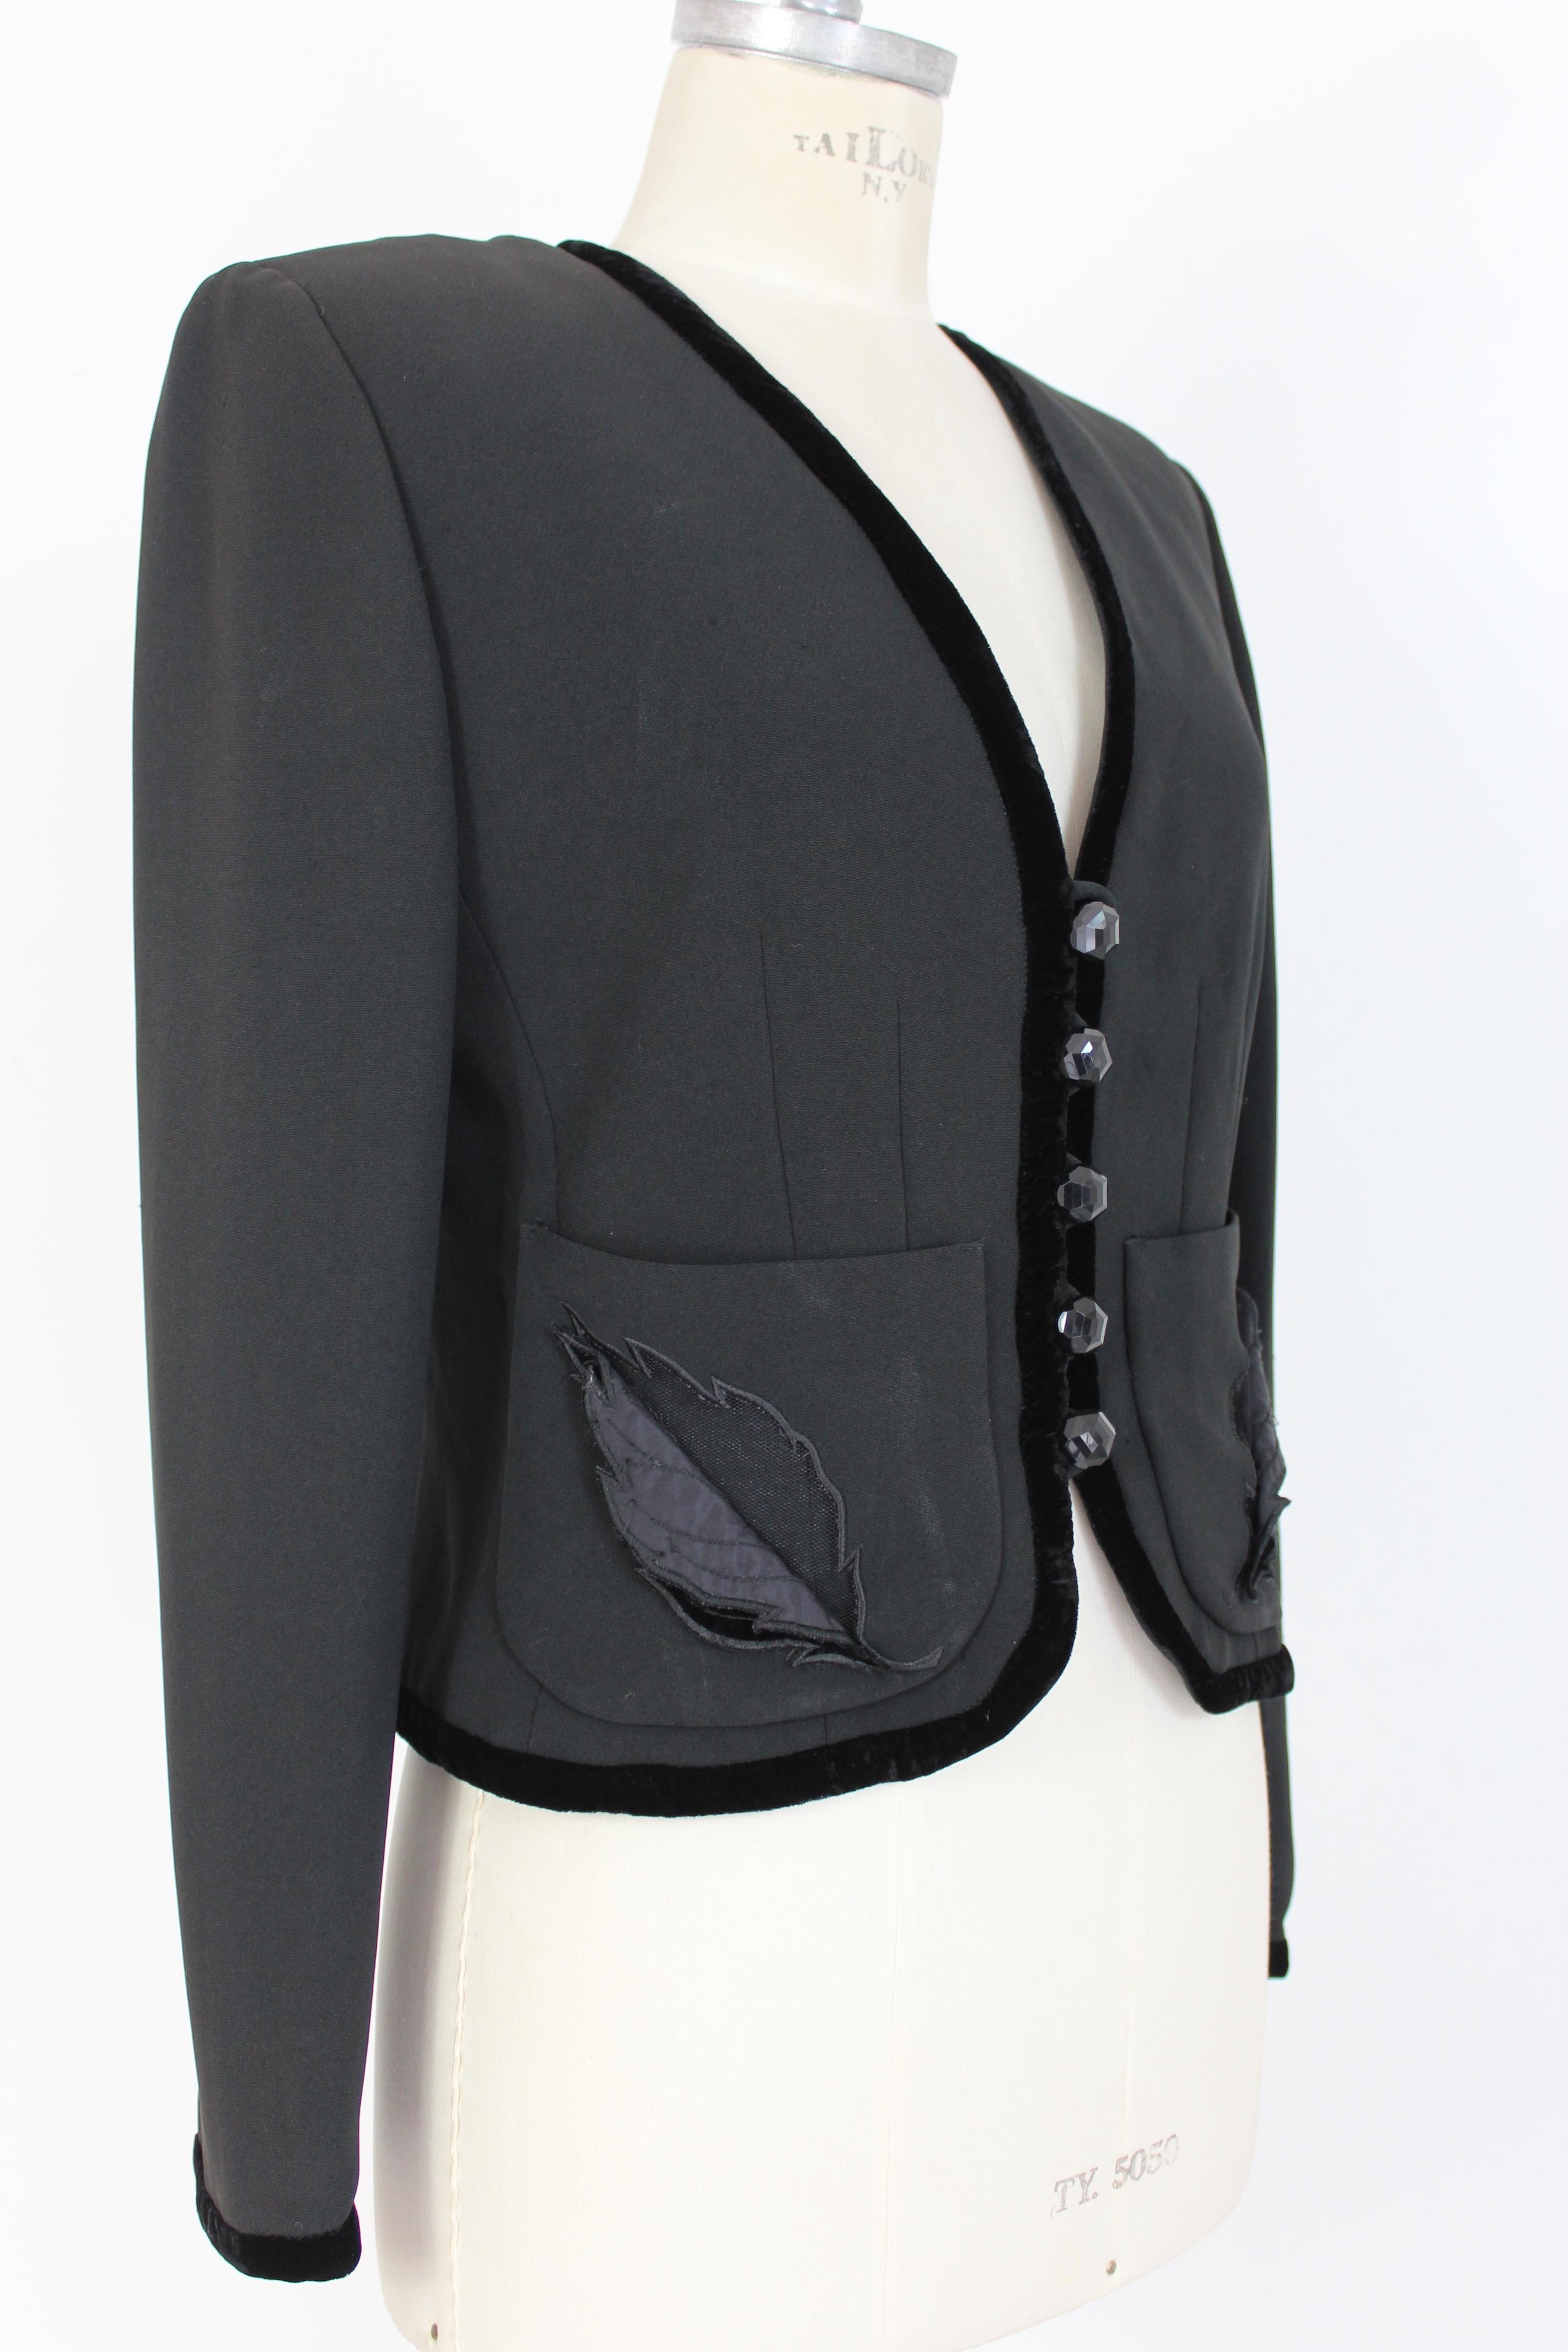 Valentino Miss V 90s vintage women's jacket. Short model, evening jacket. Black color, velvet edges, on the pockets there are velvet and lace leaves. Closure with jewel buttons. Fabric 53% acetate 47% viscose. Lined interior. Made in Italy.